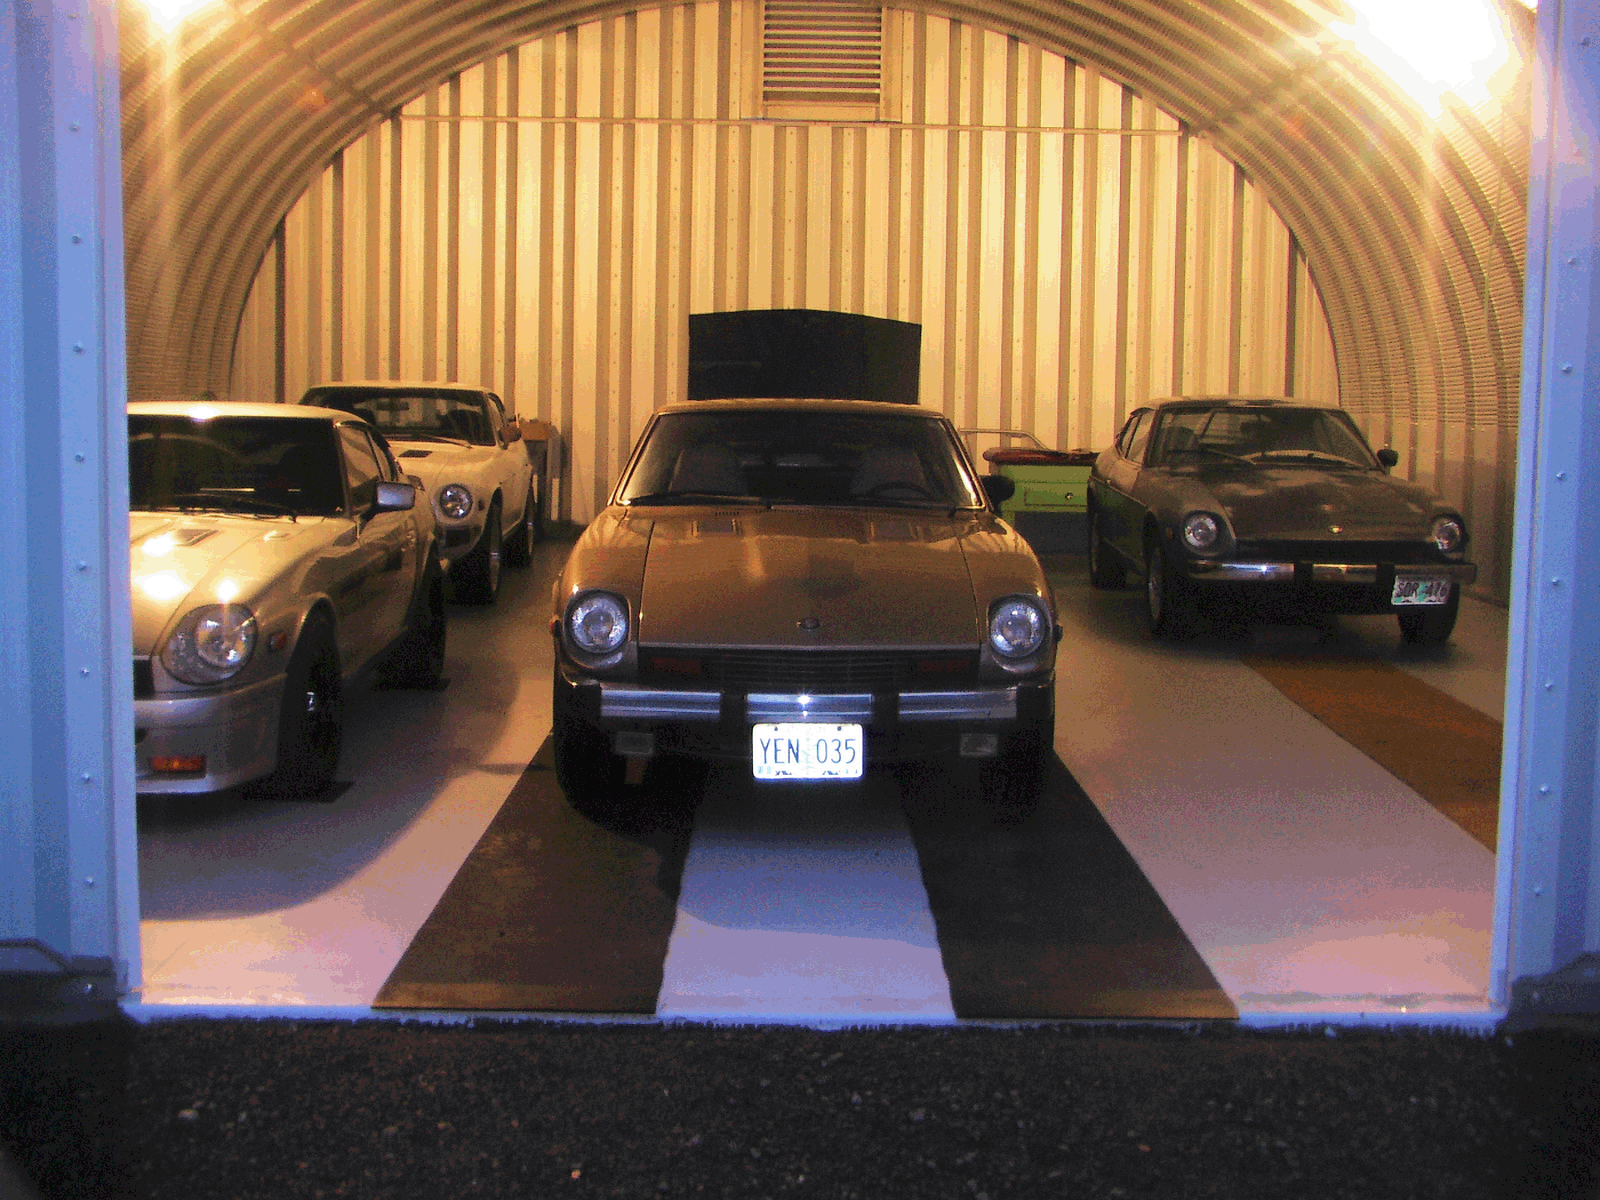 S-Model Quonset hut with four muscle cars inside, two on the right are black, and the two on the left are a lighter color.